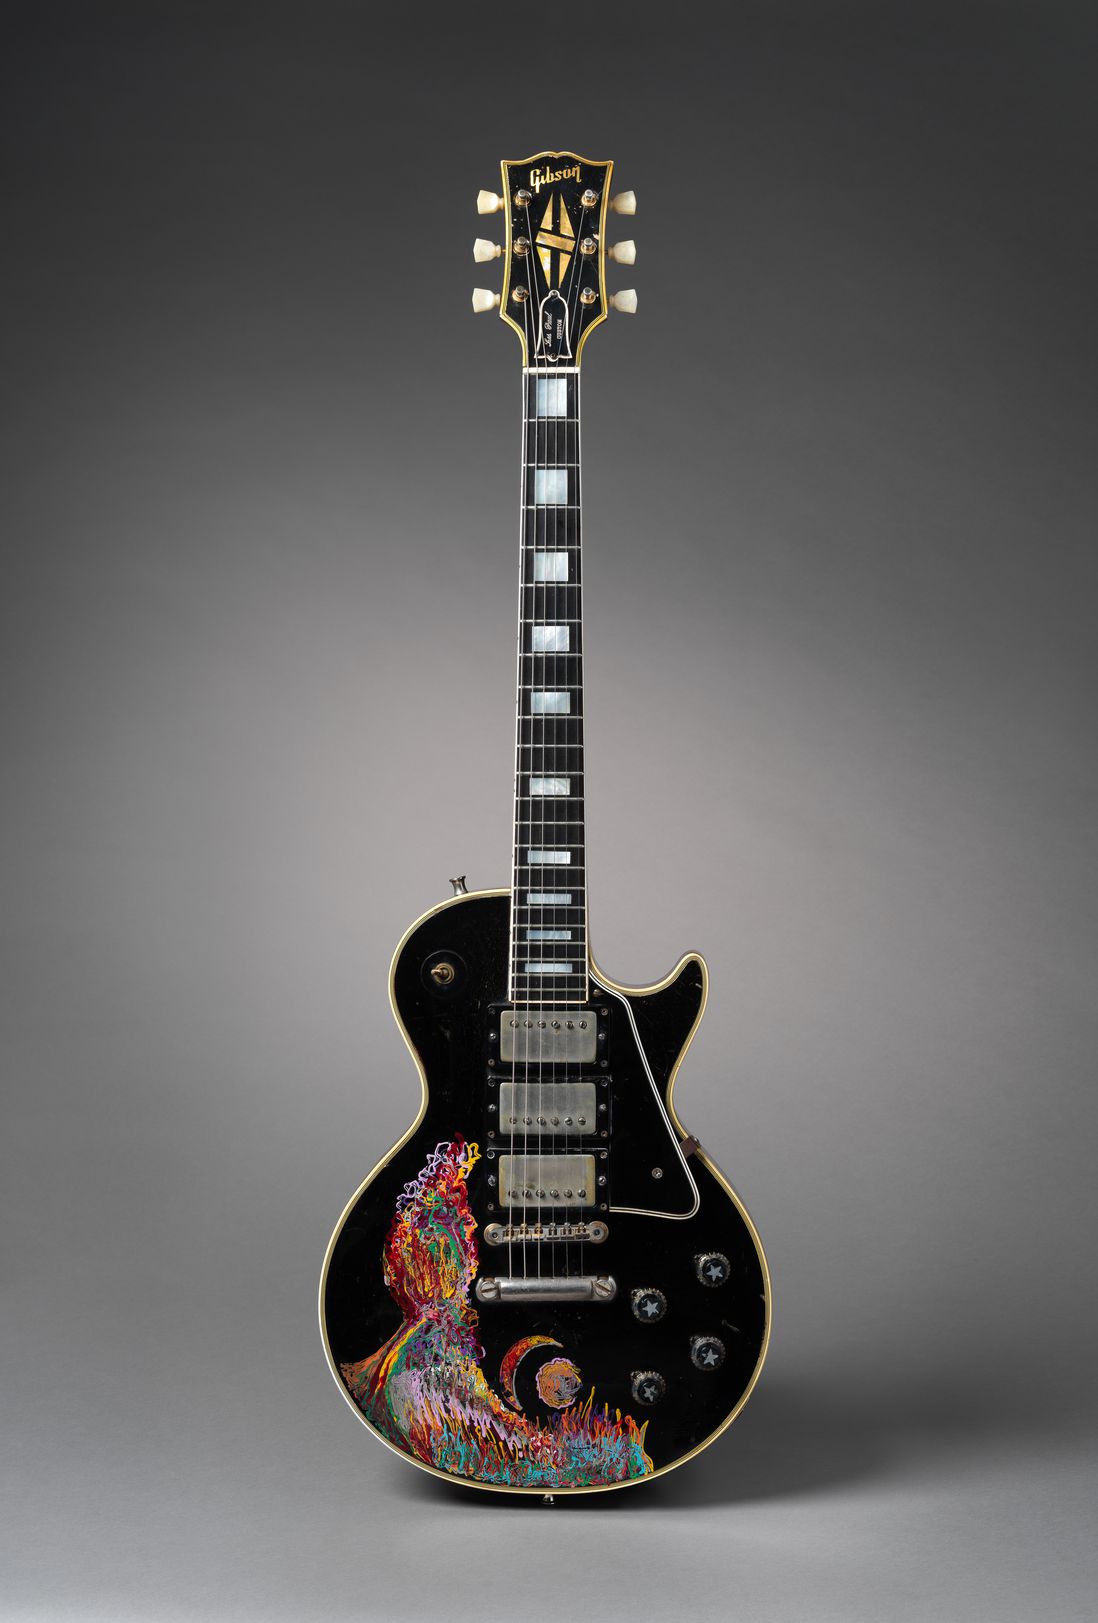 Keith Richards played and painted this Les Paul Custom electric guitar during the Rolling Stones’ "Beggar’s Banquet" sessions in 1968.